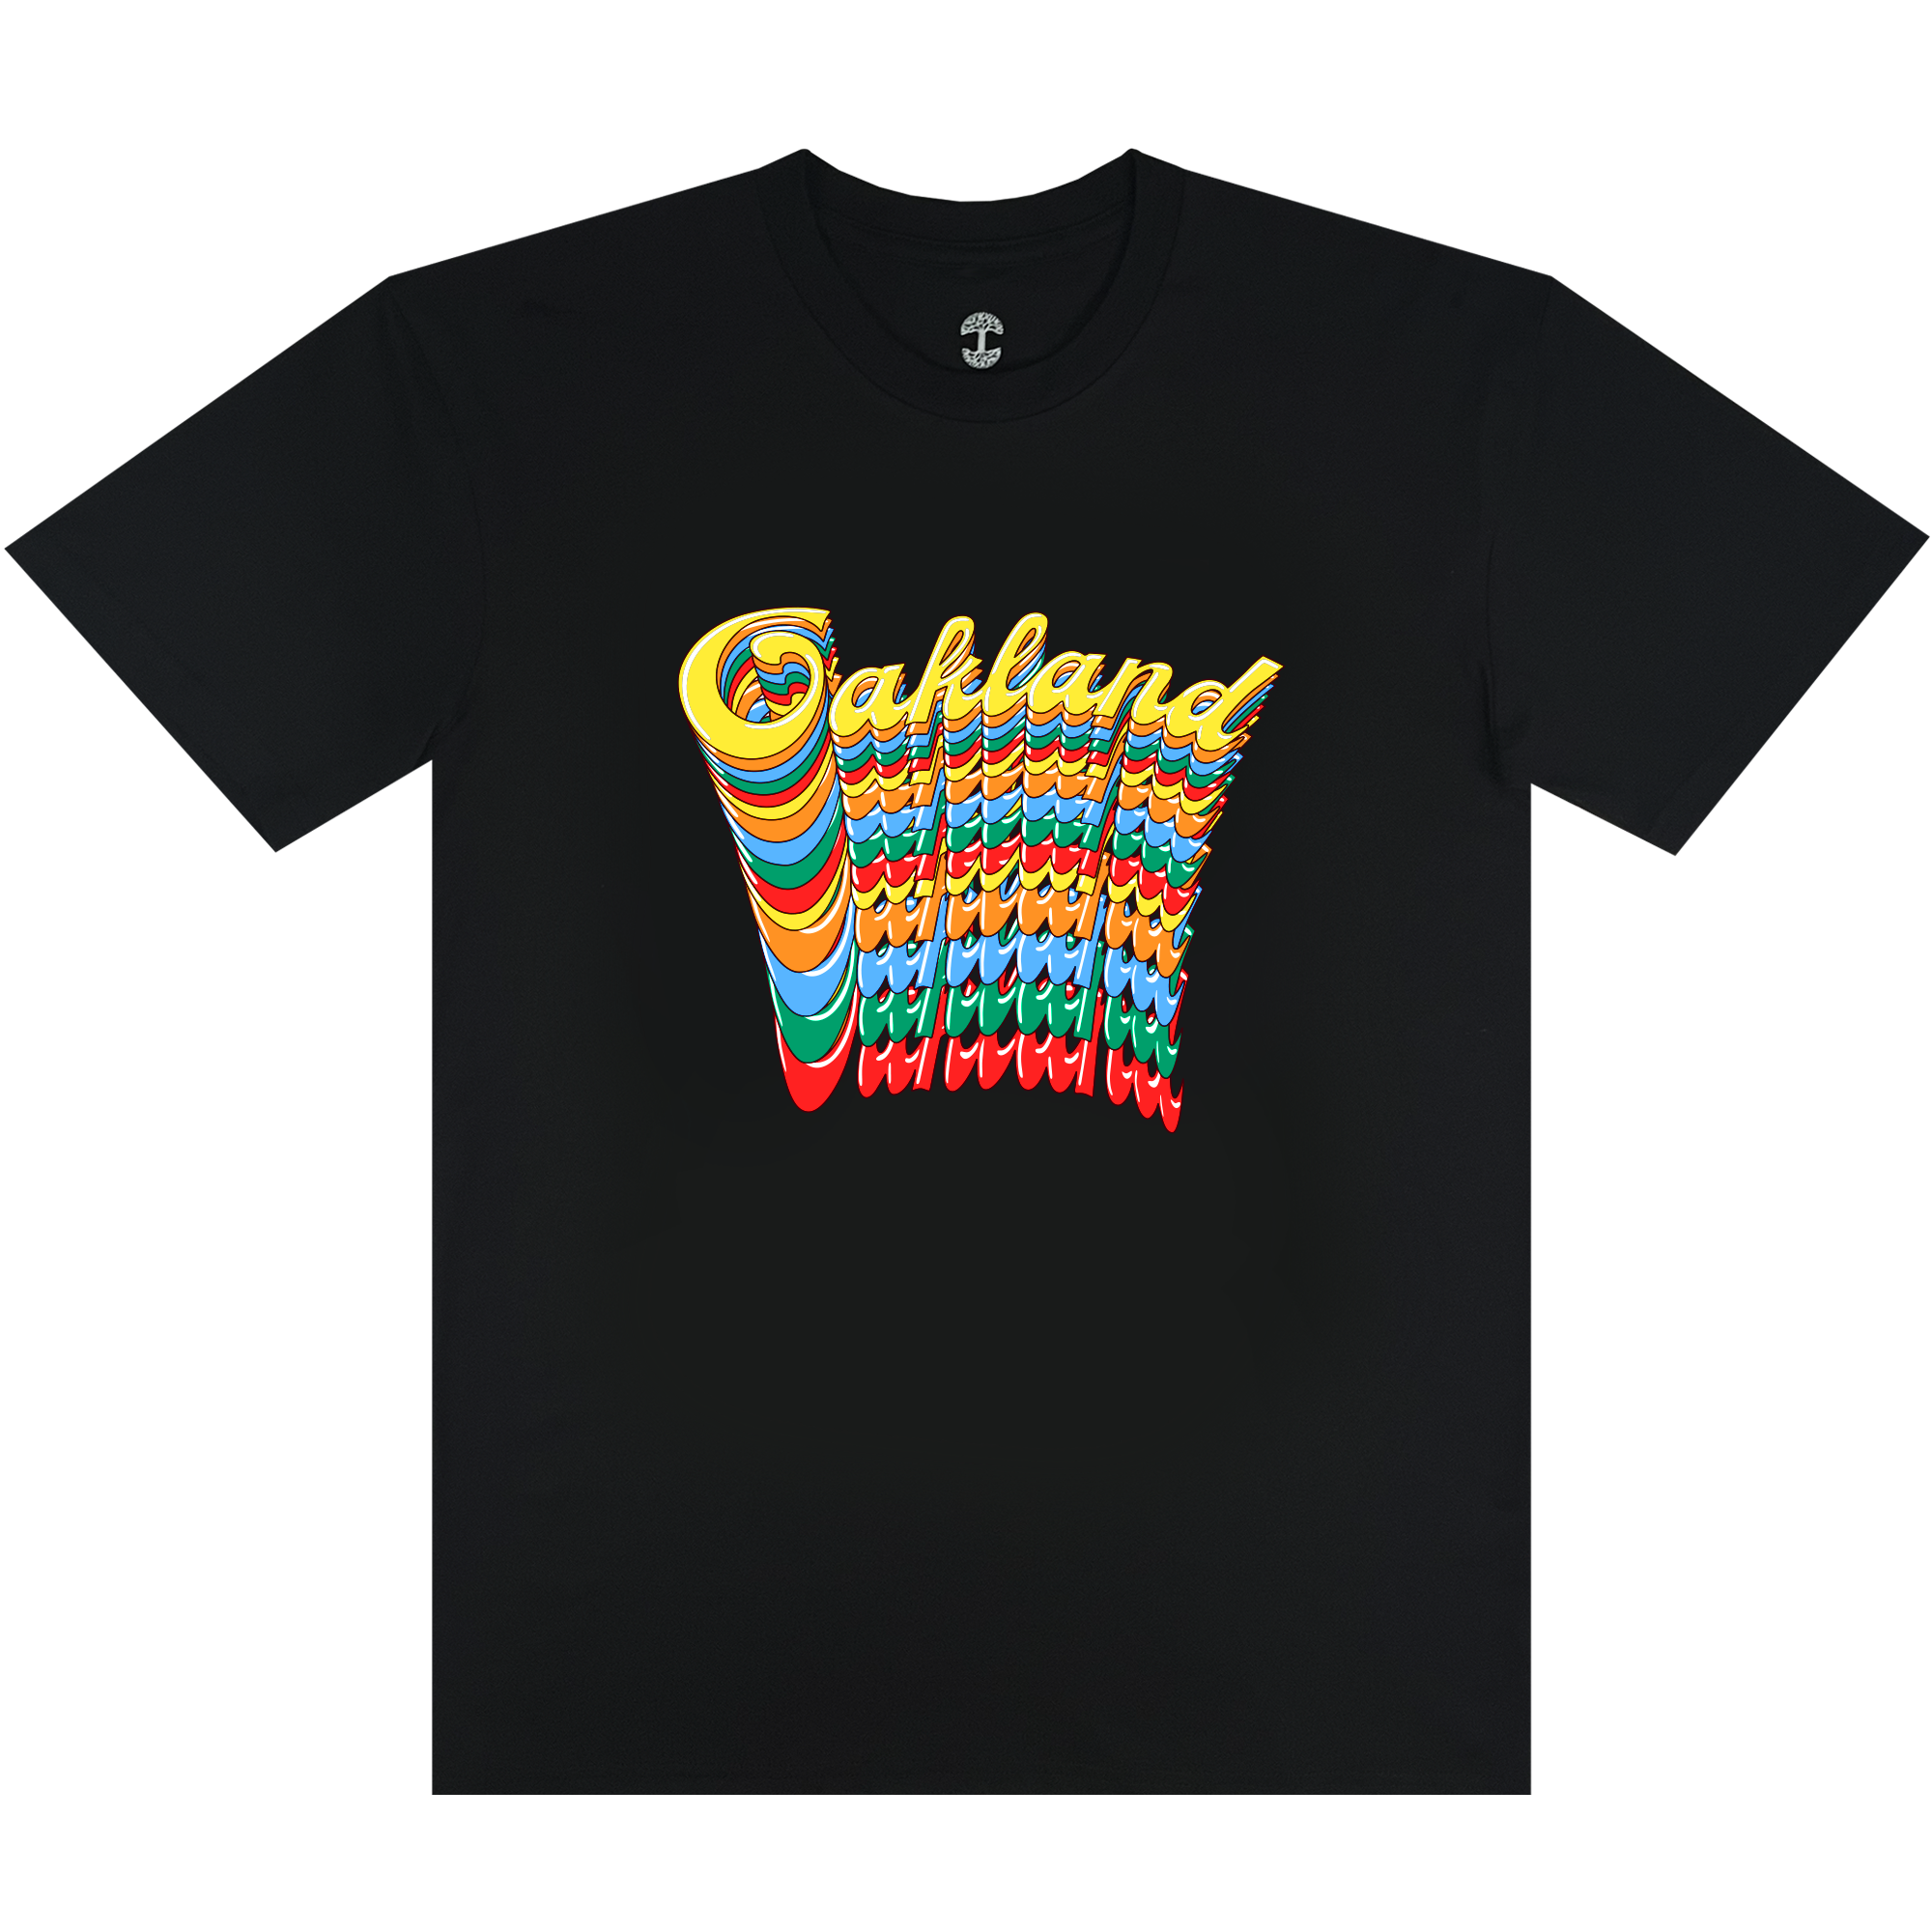 Black t-shirt with Oakland wordmark in script on repeat in rainbow color on front chest.